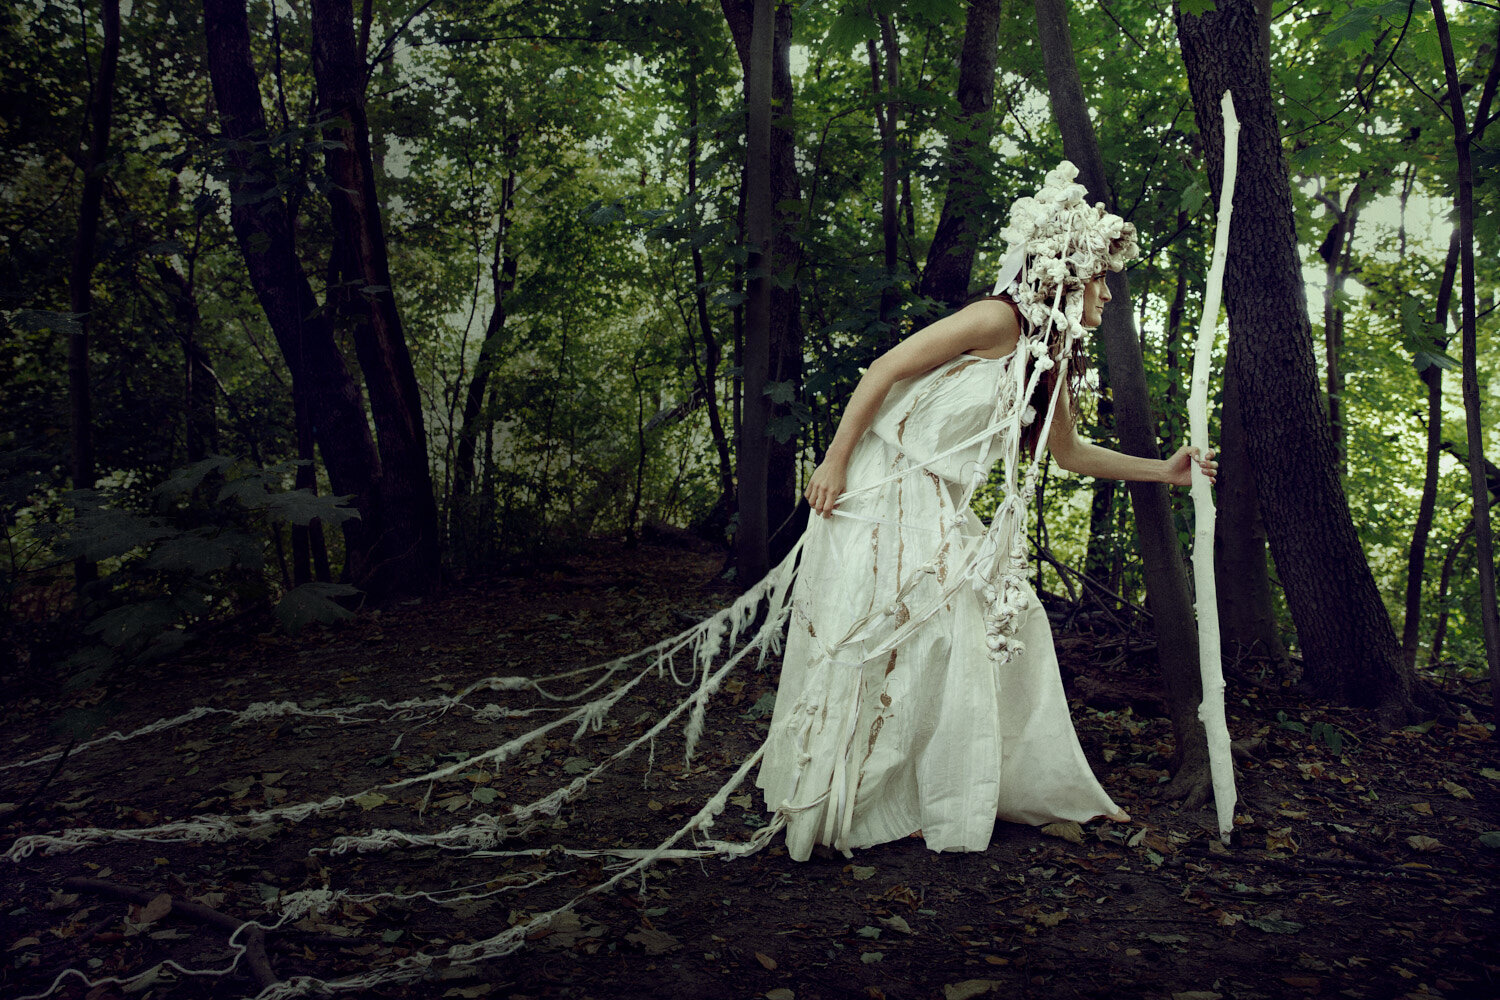 moody conceptual fashion image of elaborated knotted headpiece and garment in the woods